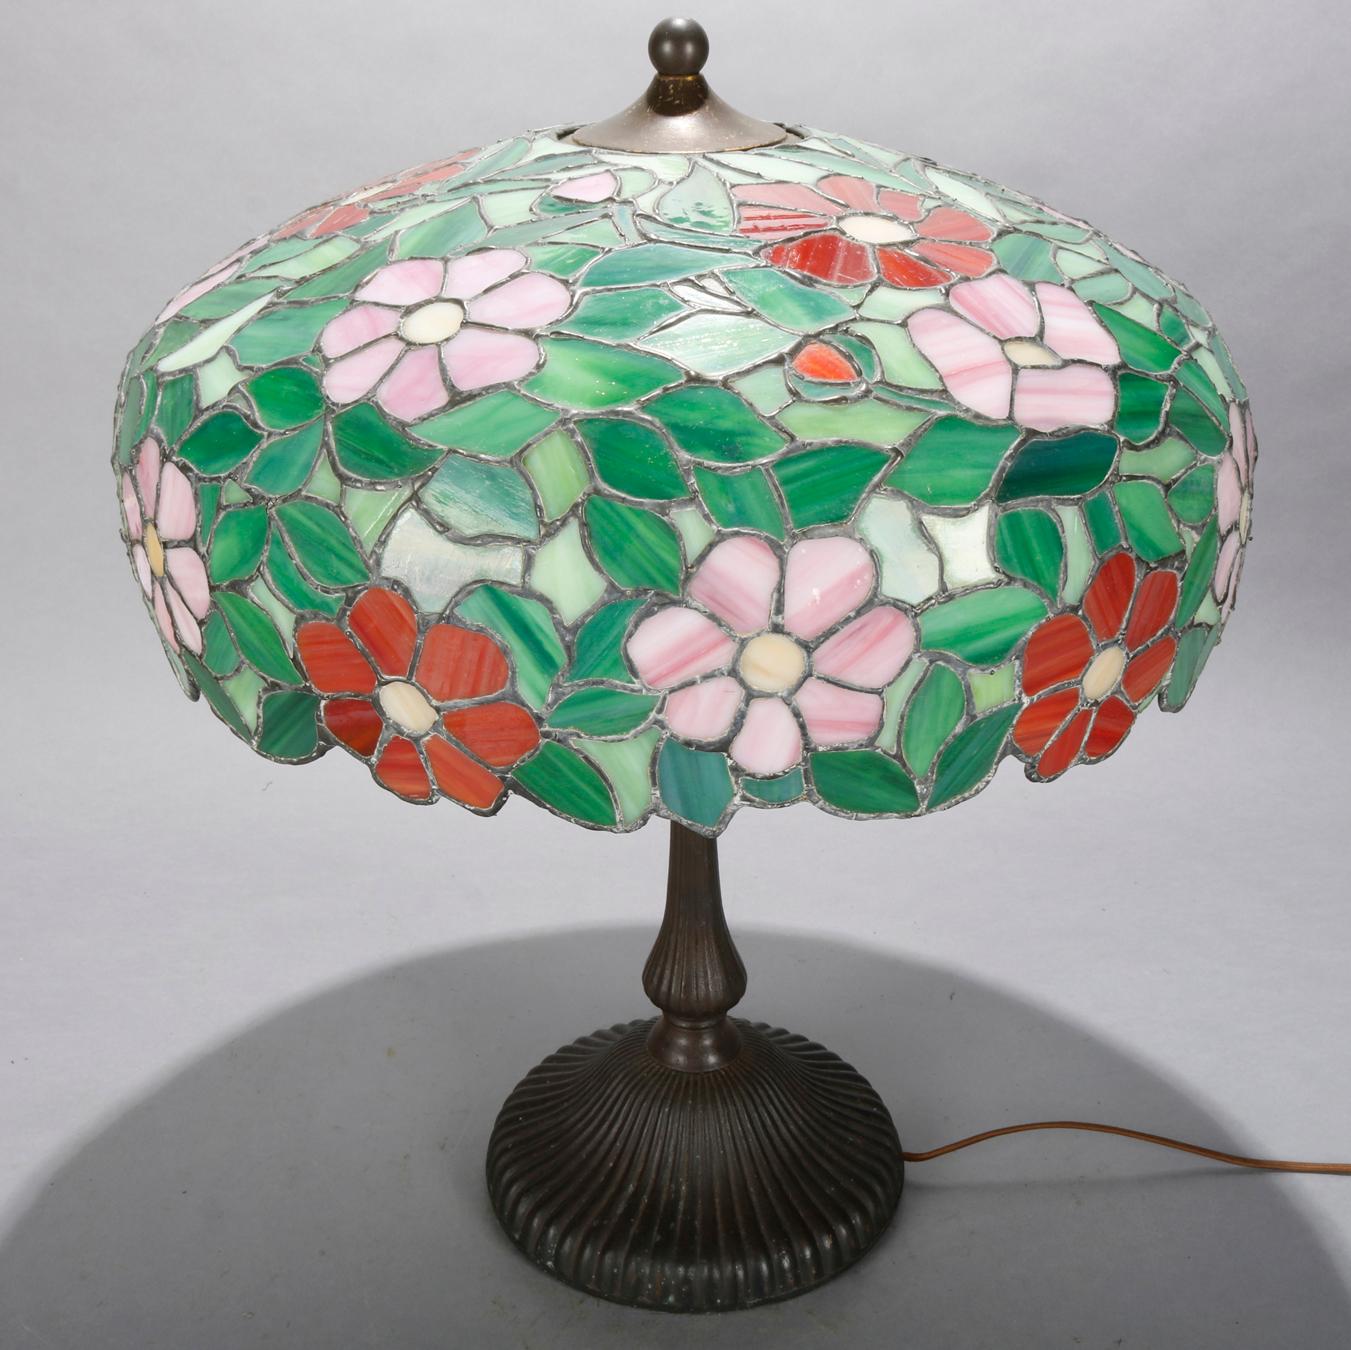 An antique Arts & Crafts leaded glass table lamp in the manner of Williamson offers floral mosaic slag glass shade
surmounting cast base having three independently controlled sockets, circa 1920

Measures: 23.5